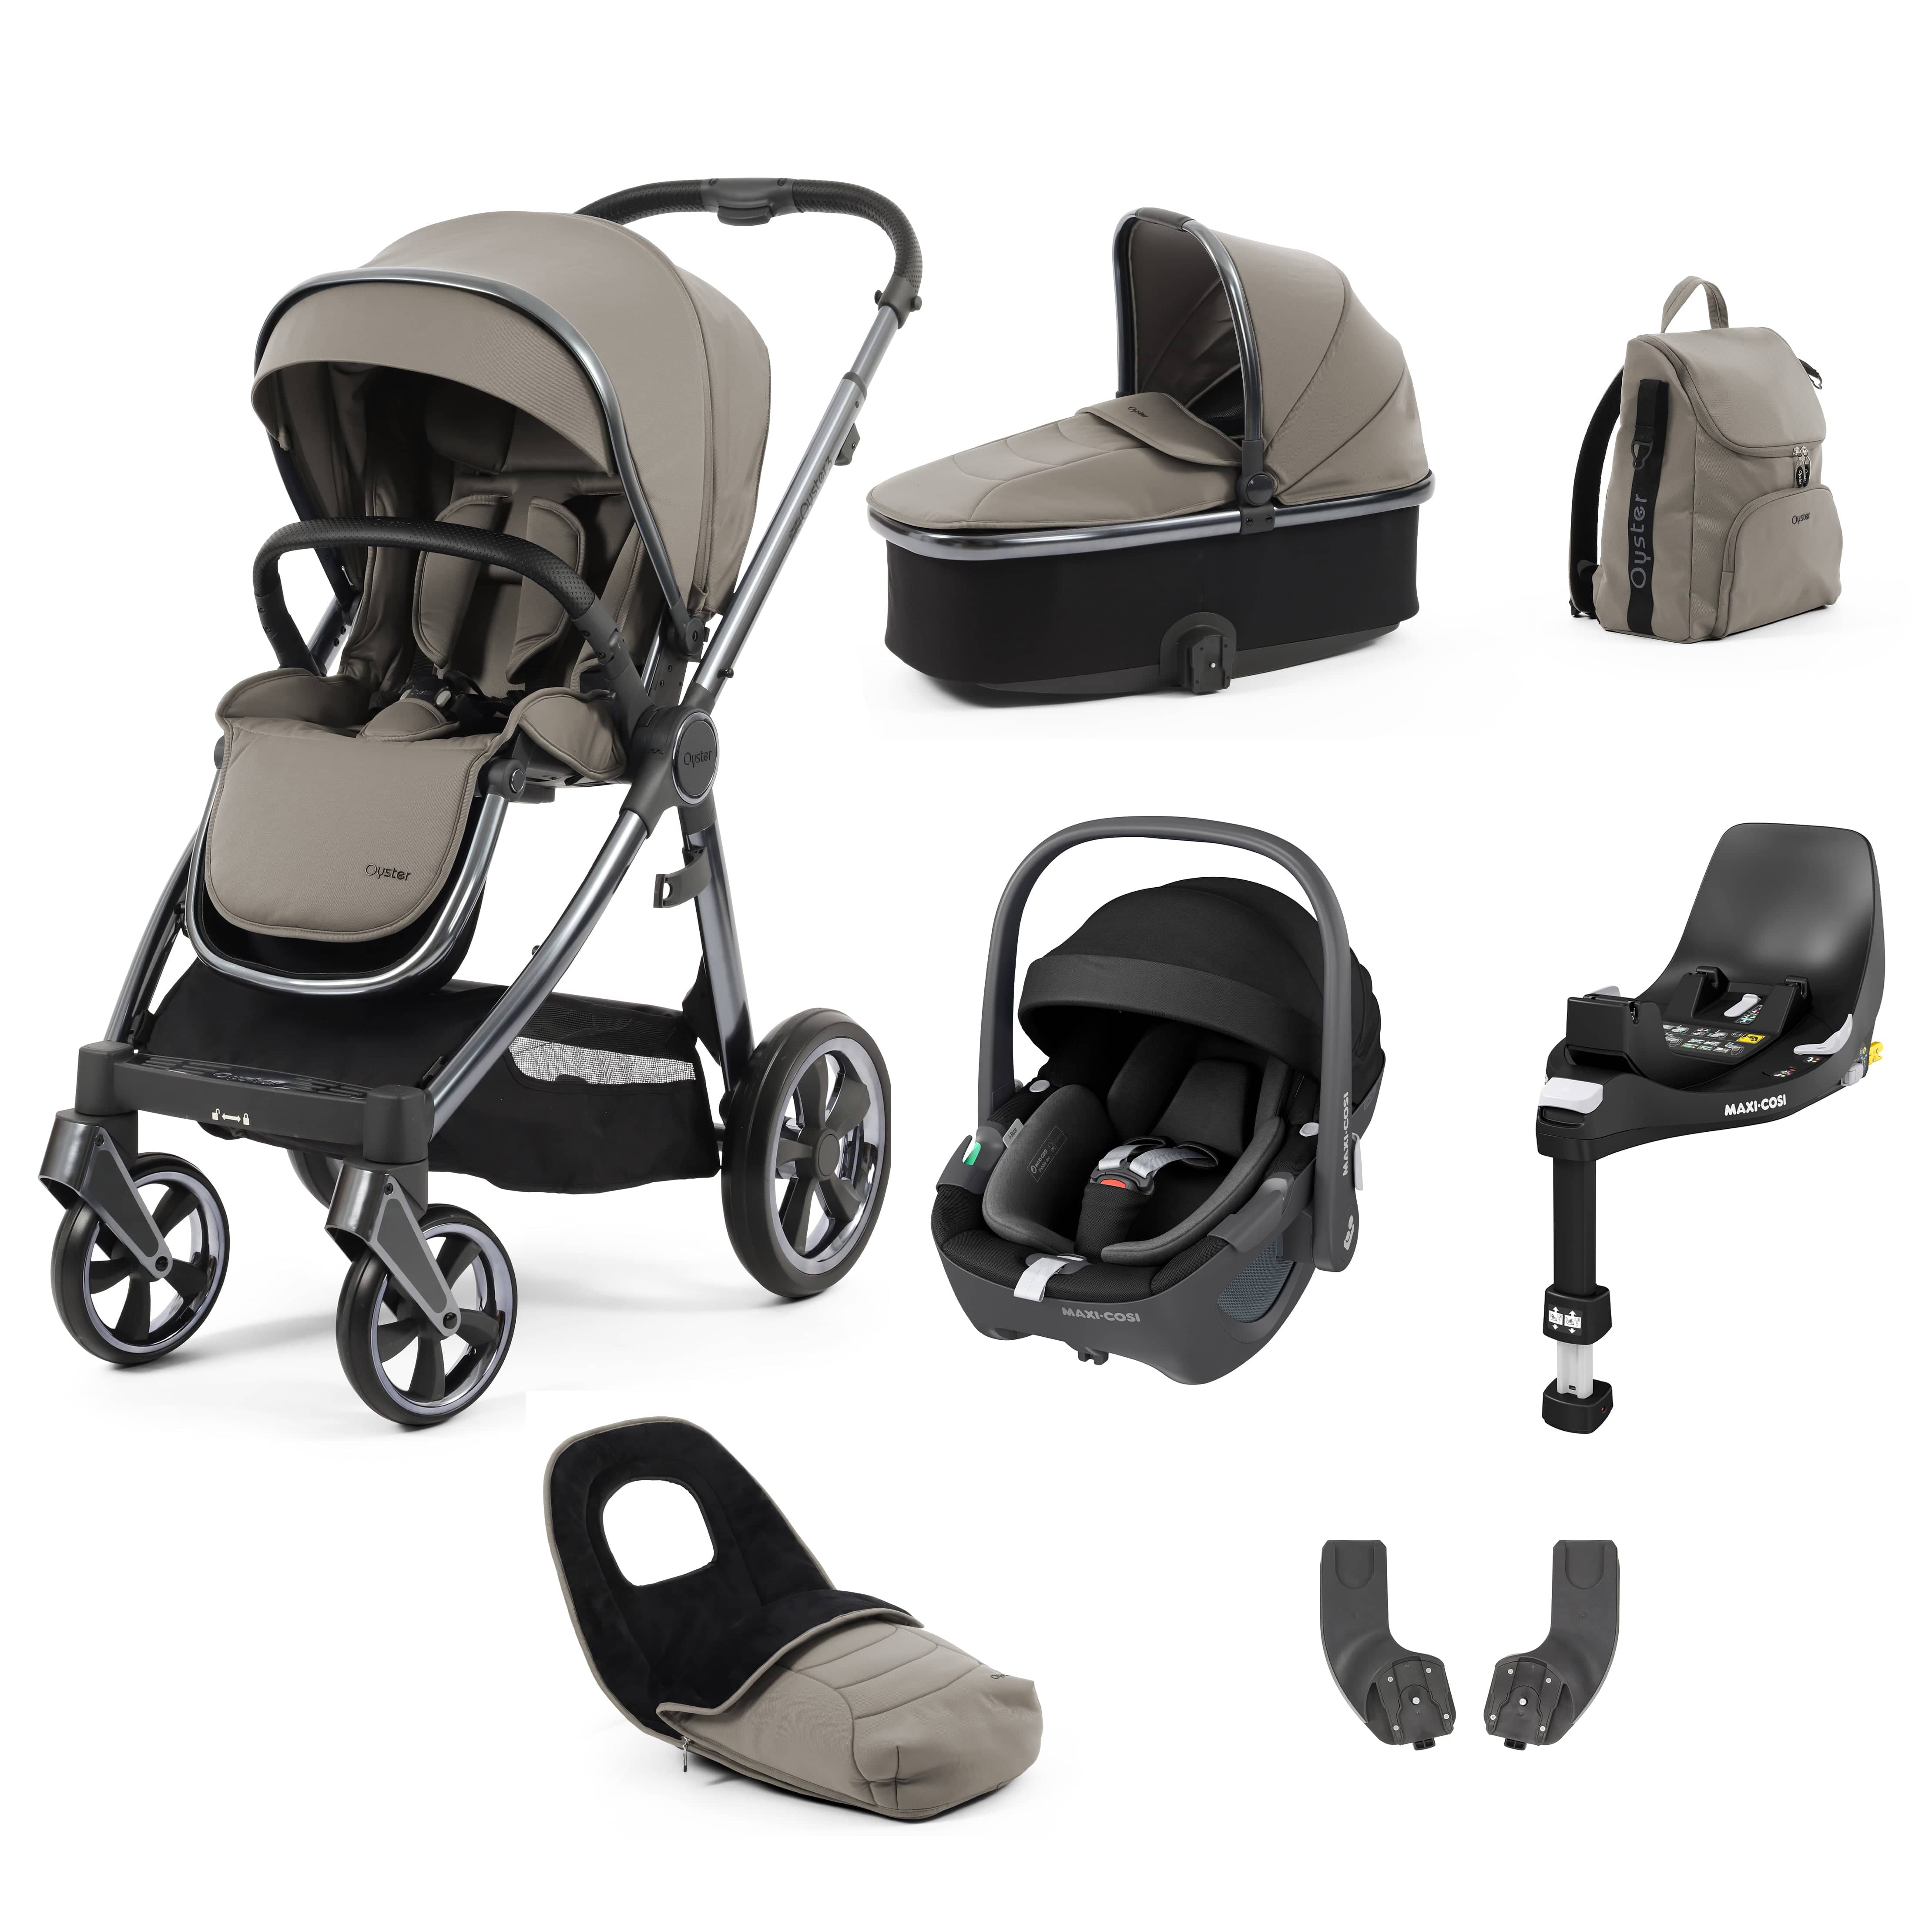 BabyStyle travel systems Babystyle Oyster 3 Luxury 7 Piece with Car Seat Bundle in Stone 14809-STN